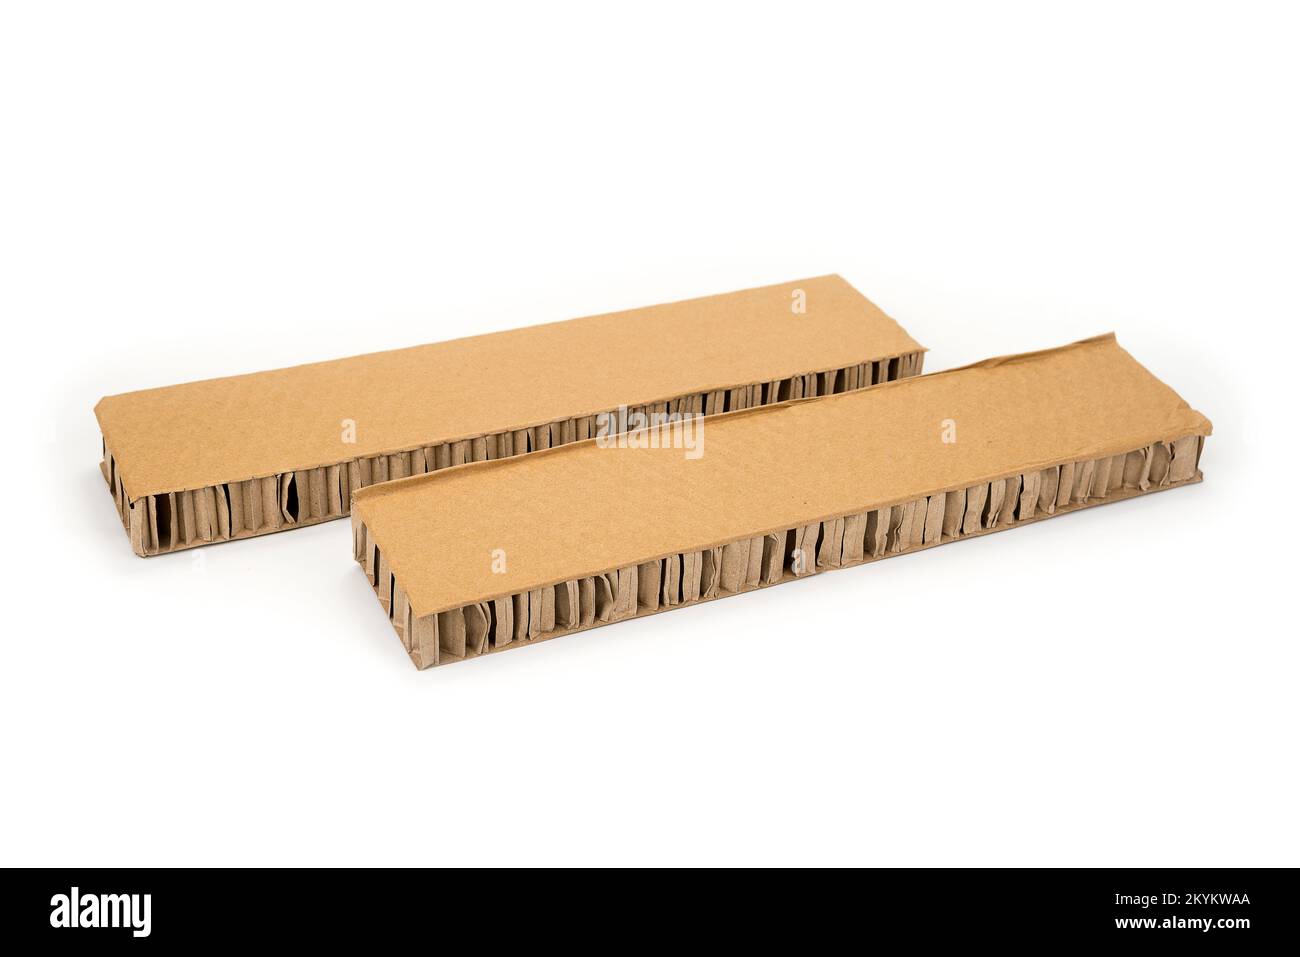 Cardboard paper filler of empty spaces for shipment Stock Photo